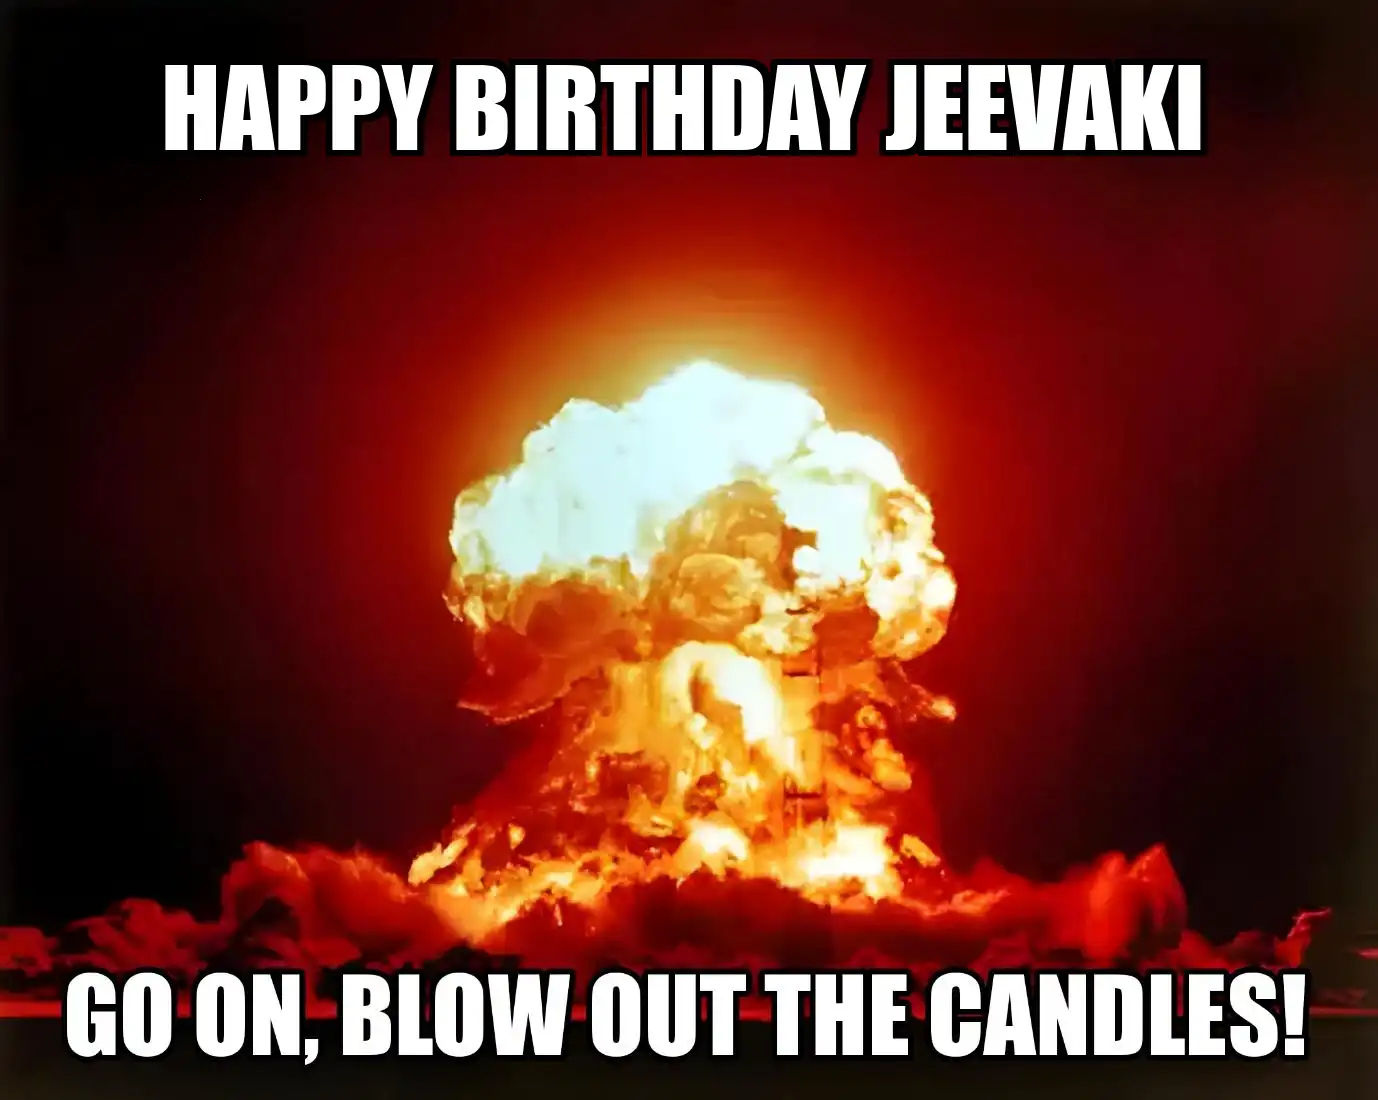 Happy Birthday Jeevaki Go On Blow Out The Candles Meme